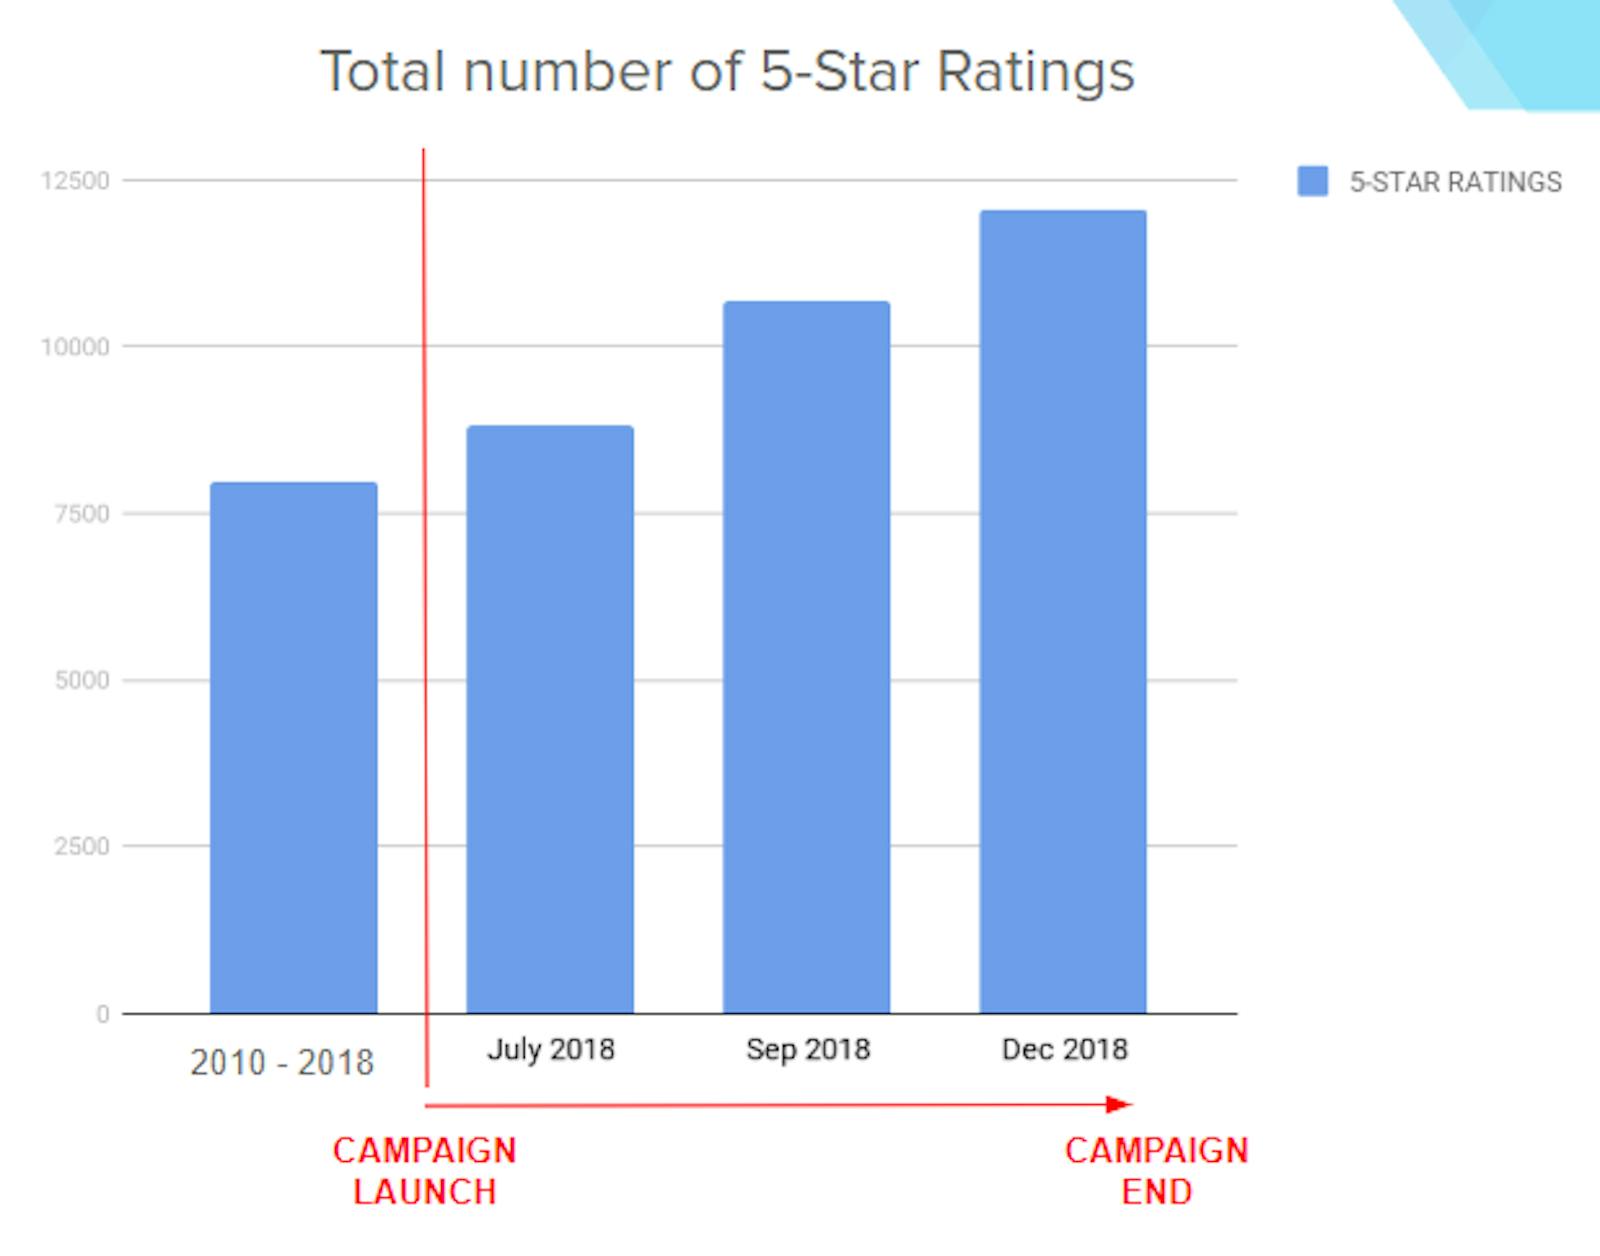 Total number of 5-star ratings chart